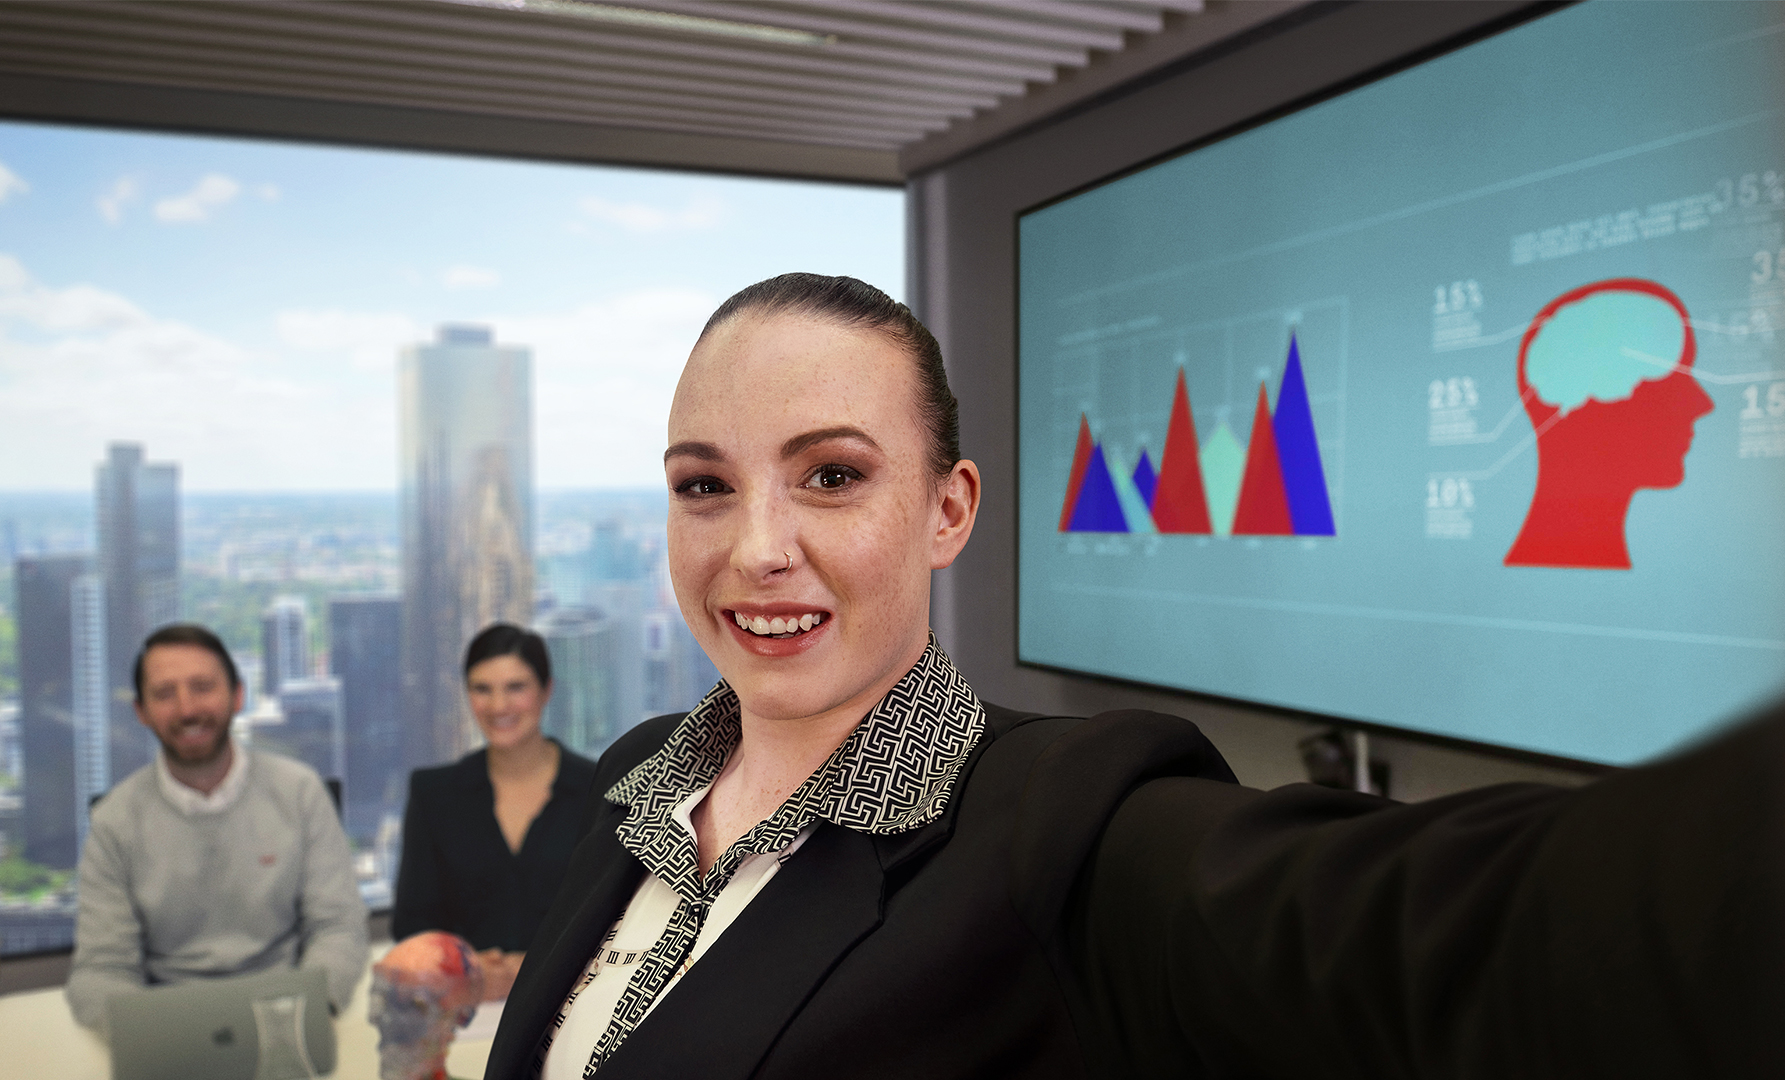 Young female in a boardroom presenting to a group of people, presentation is on the screen and the city skyline in the background.